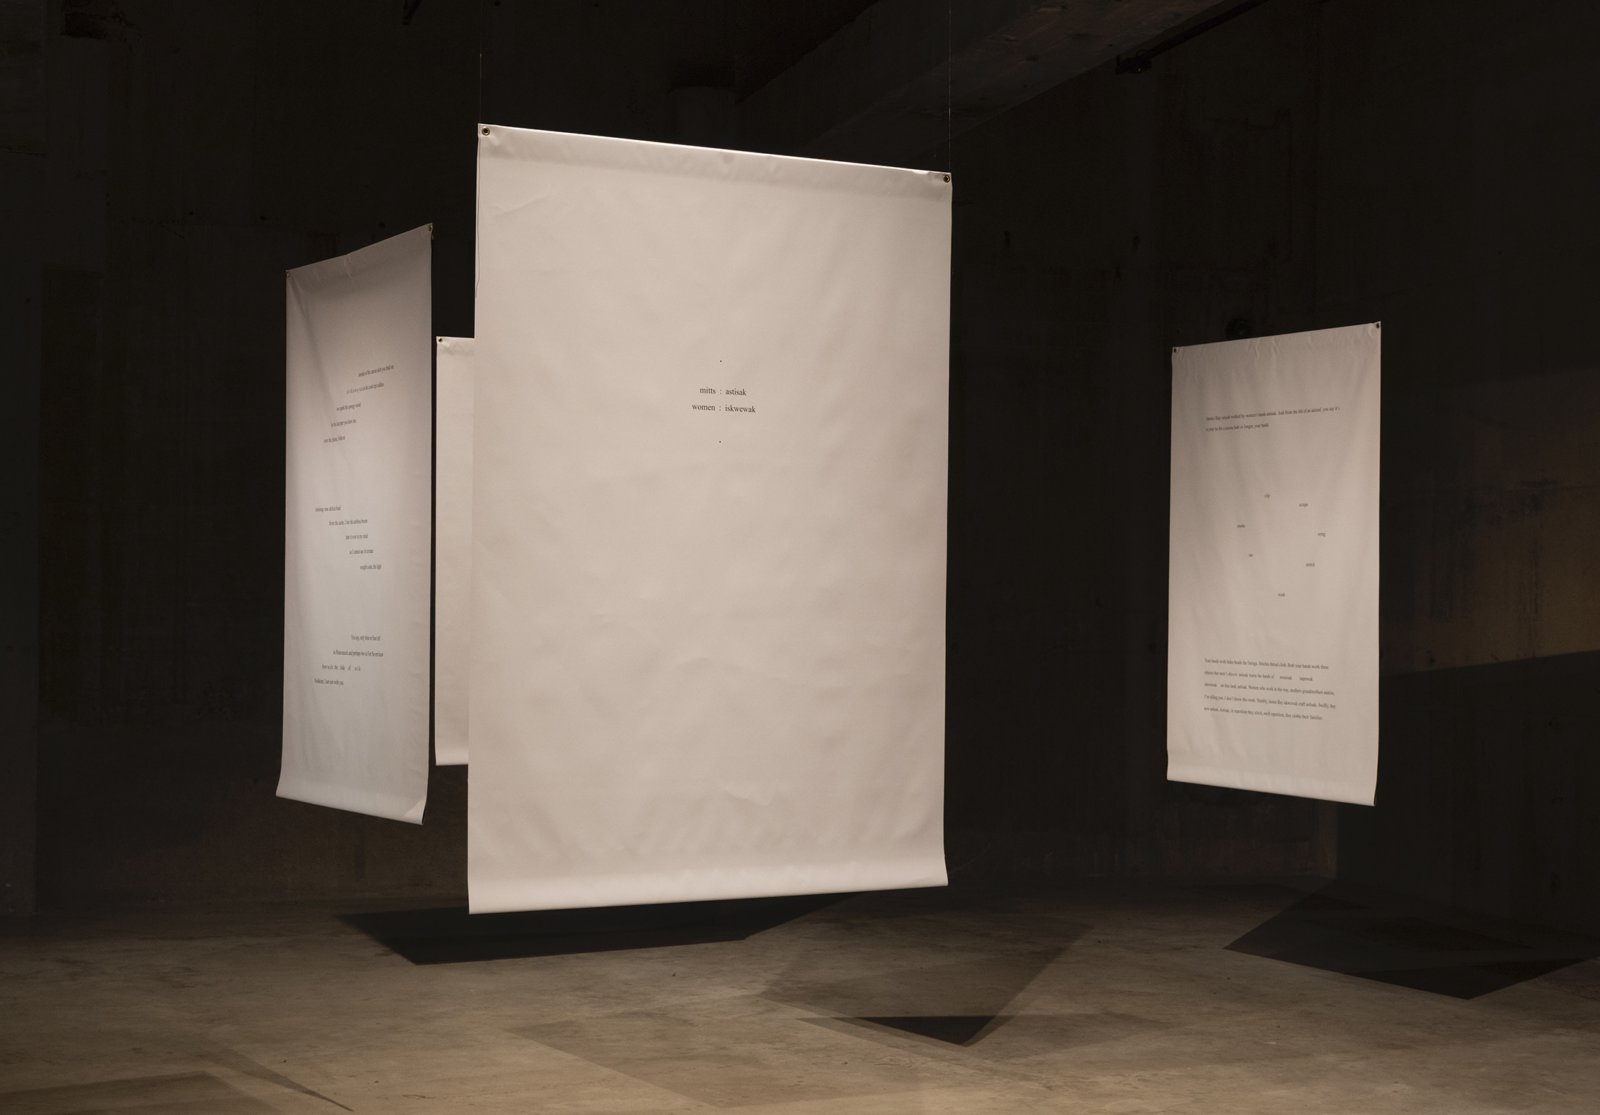 Tanya Lukin Linklater, Slow Scrape, 2013, 5 banners, canvas, grommets, sinew, 66 x 51 in. (168 x 130 cm). Installation view, Our Bodies, Our Archives, Tate Modern, London, UK, 2020